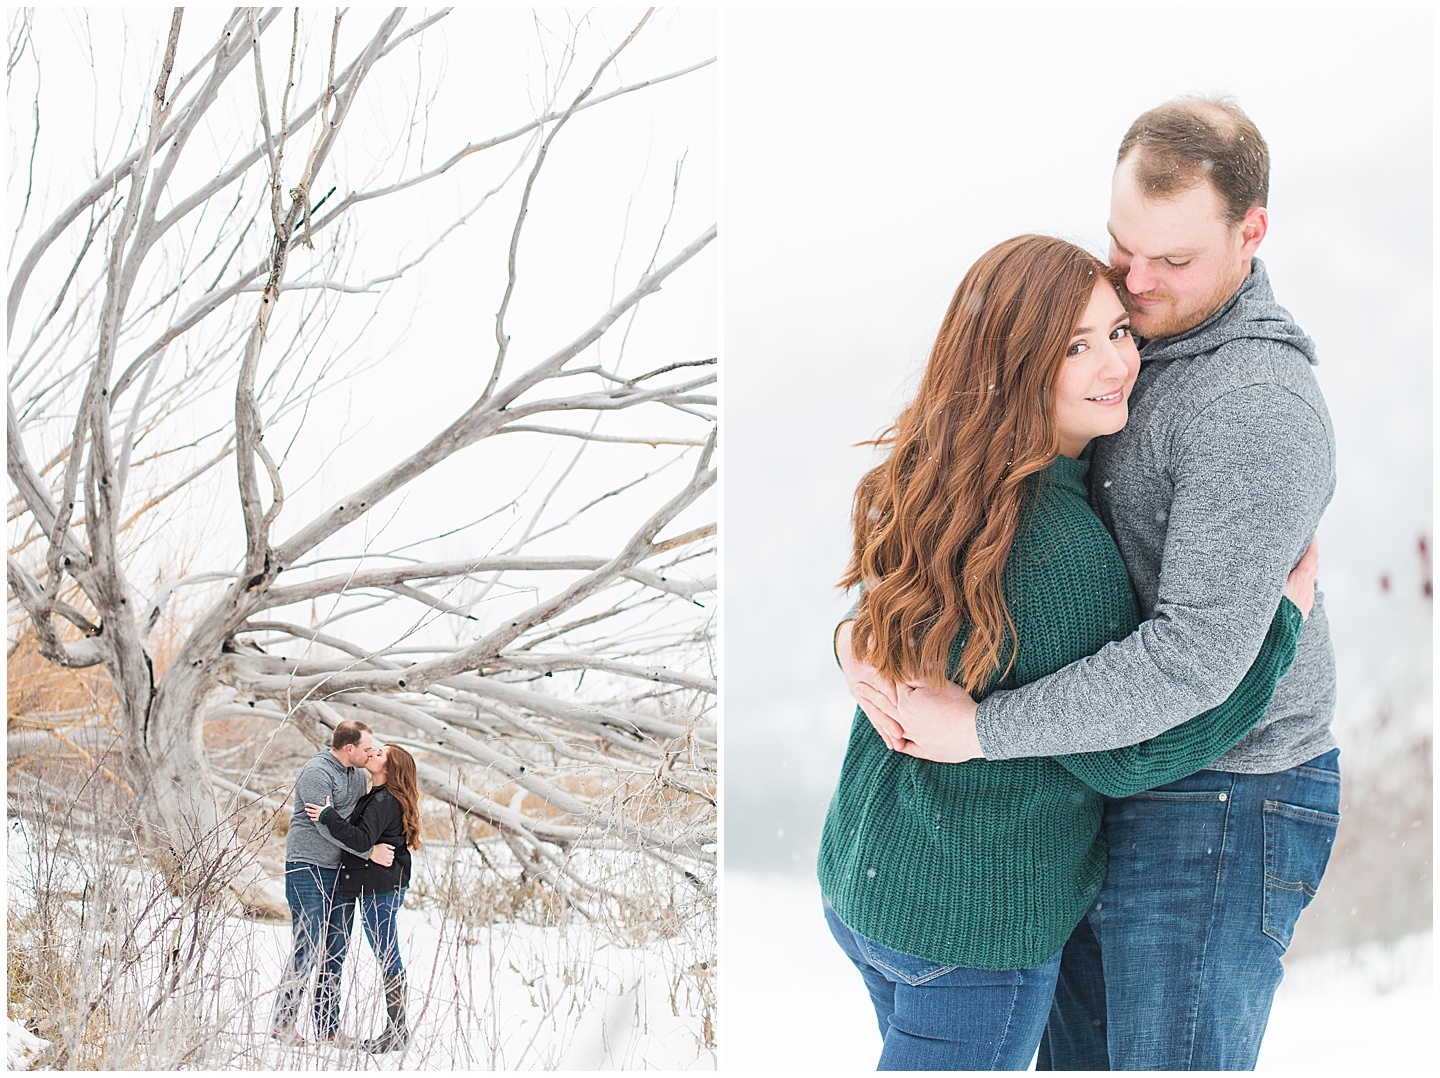 Winter Snowy Mountain Engagement Session Tiffany Joy W Photography